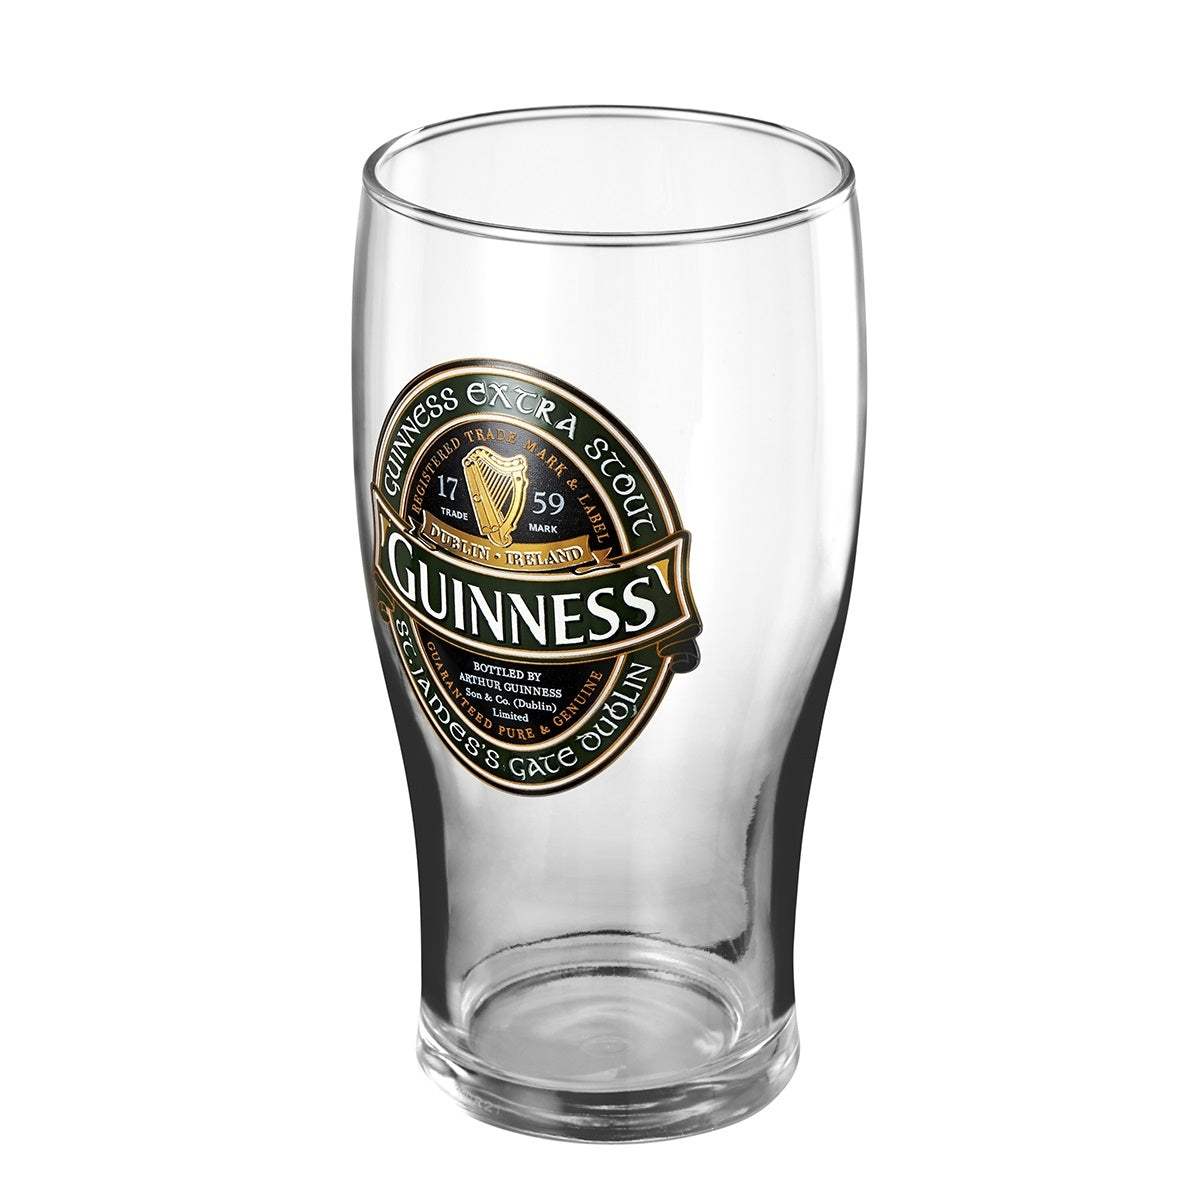 Guinness Ireland Collection Pint Glass 24 Pack